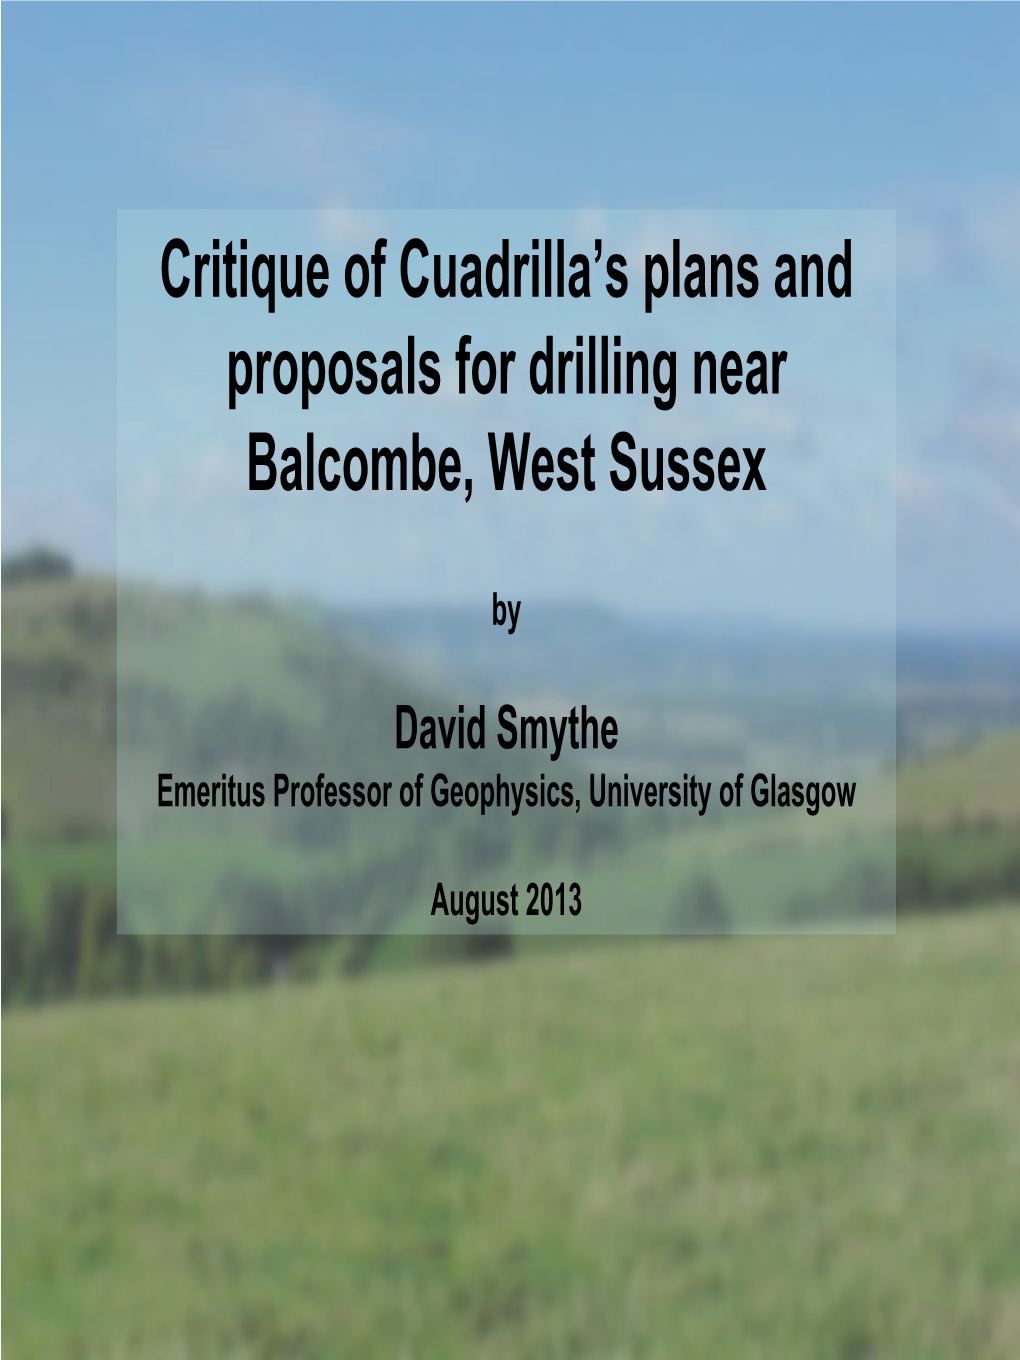 Critique of Cuadrilla's Plans and Proposals for Drilling Near